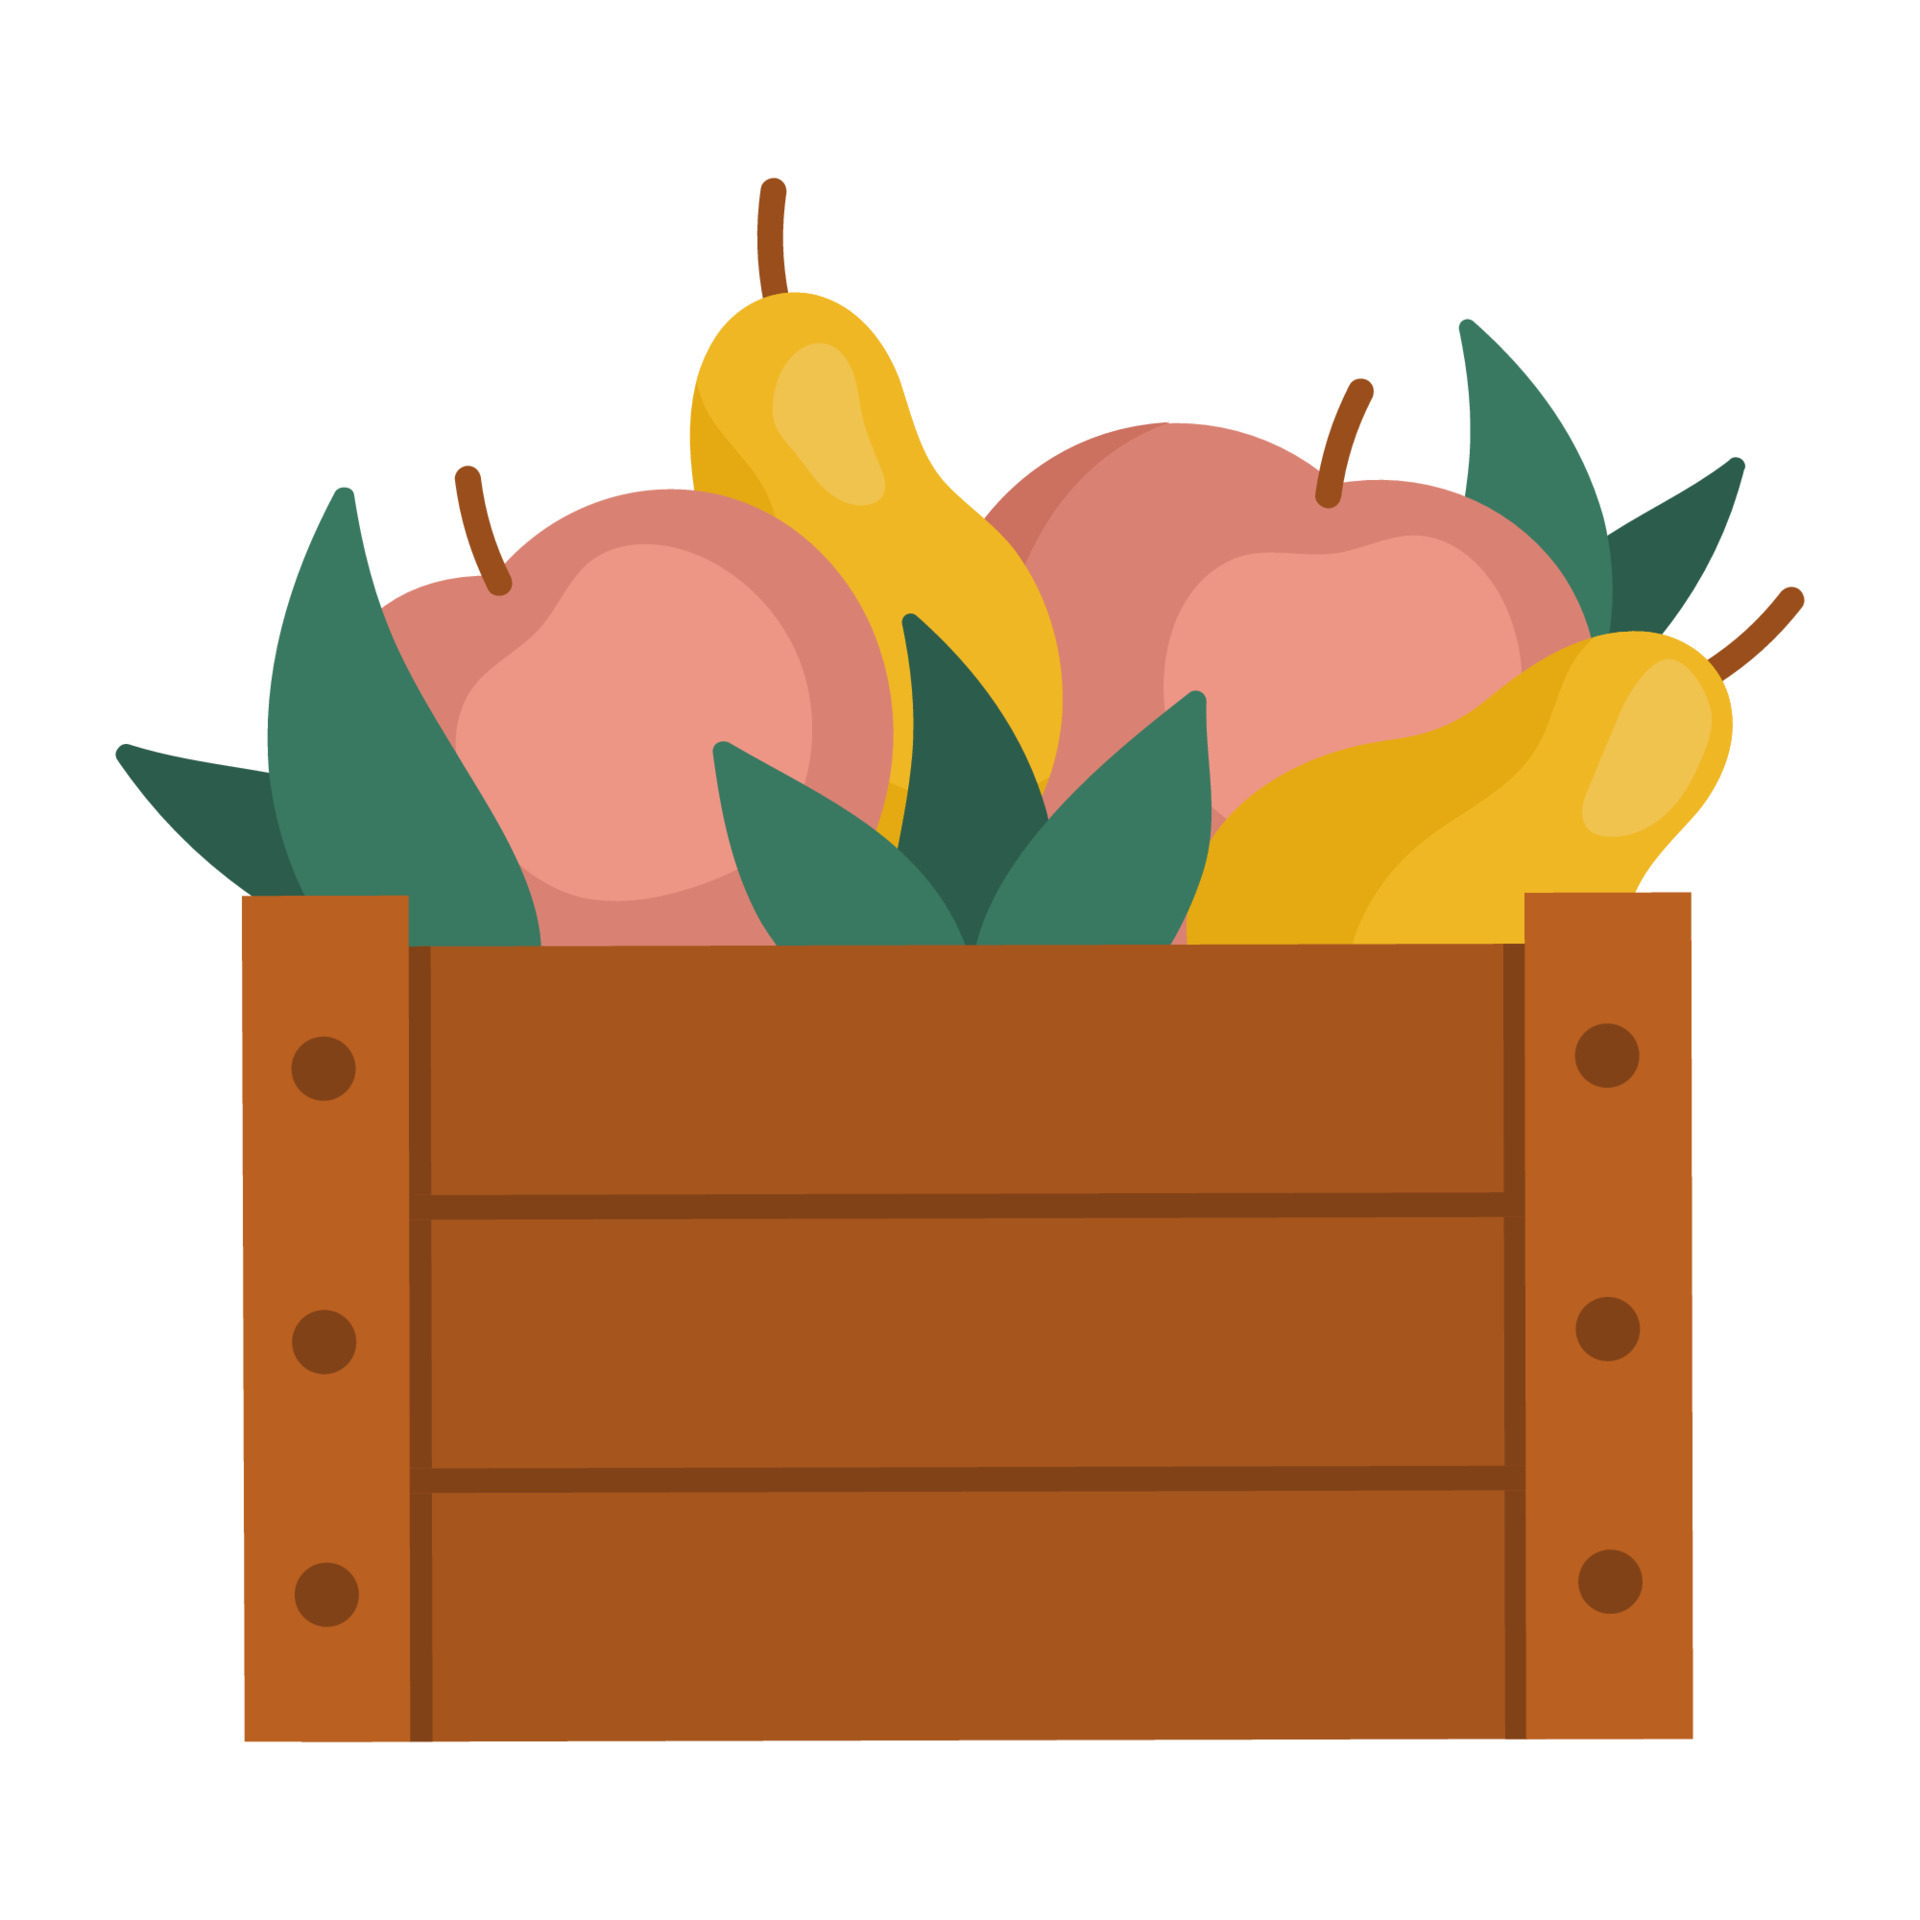 https://static.vecteezy.com/system/resources/previews/017/368/702/original/cute-wooden-box-with-apples-pears-flowers-and-leaves-autumn-garden-clipart-funny-flat-style-fruit-illustration-isolated-on-white-background-farm-harvest-icon-vector.jpg